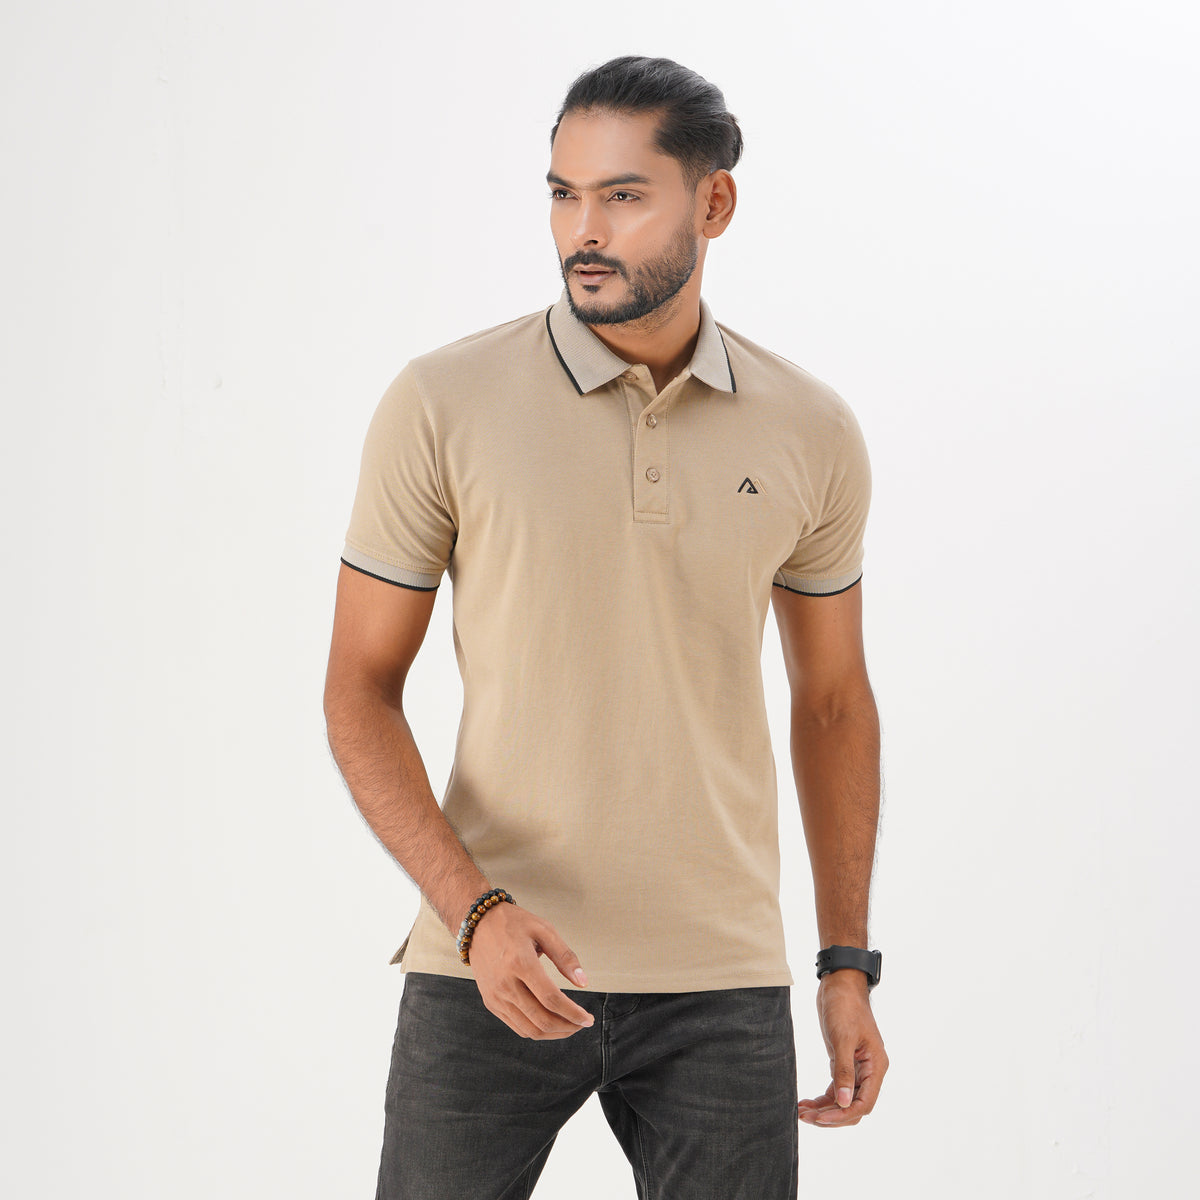 Polo Shirt for Men | Solid Biscuit Polo